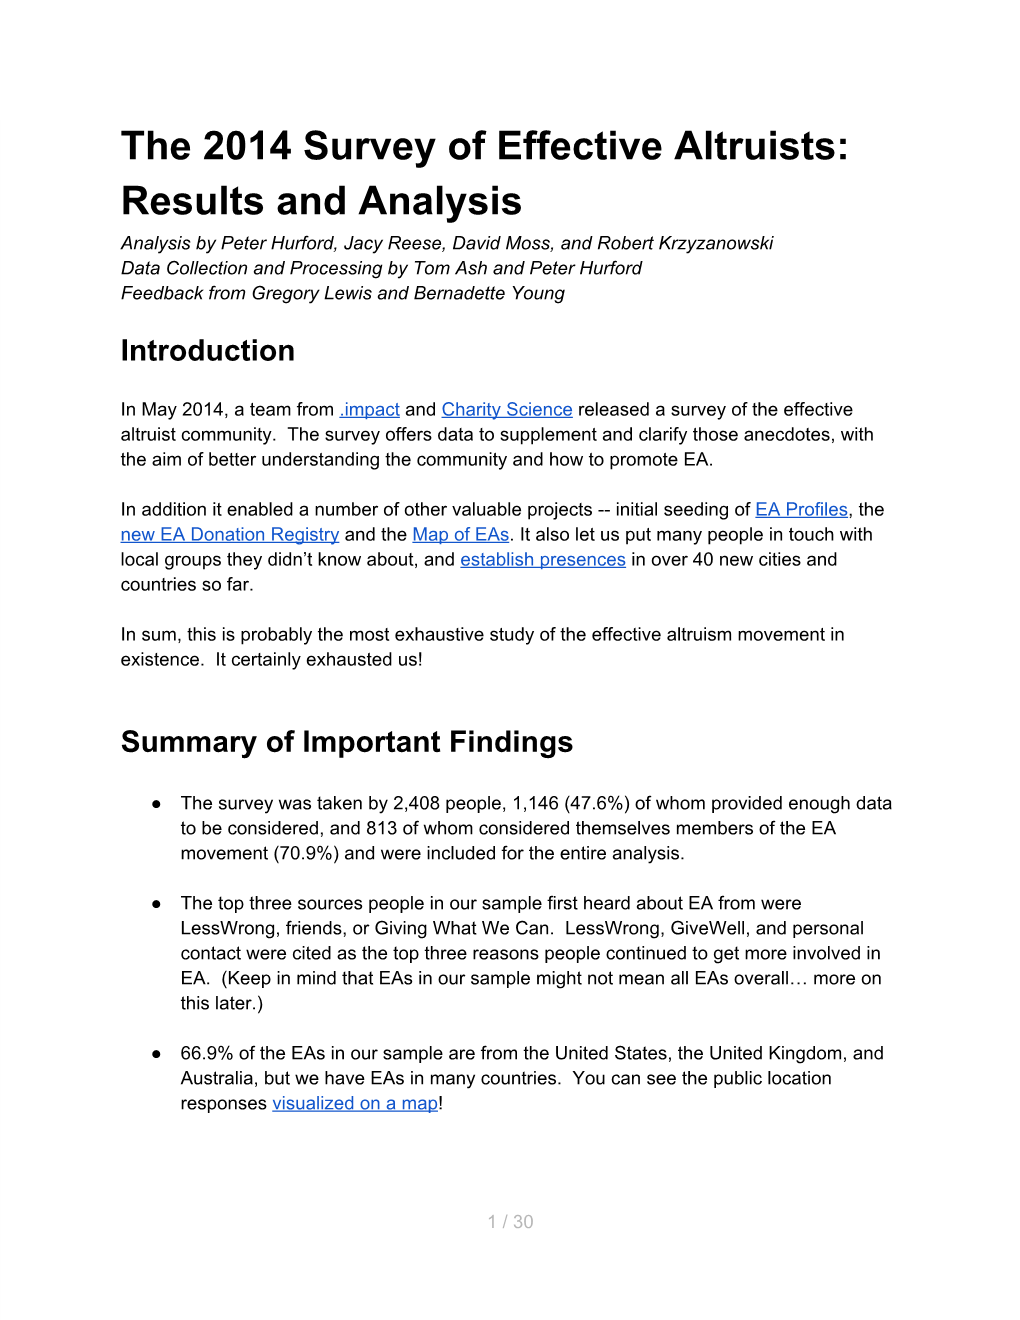 The 2014 Survey of Effective Altruists